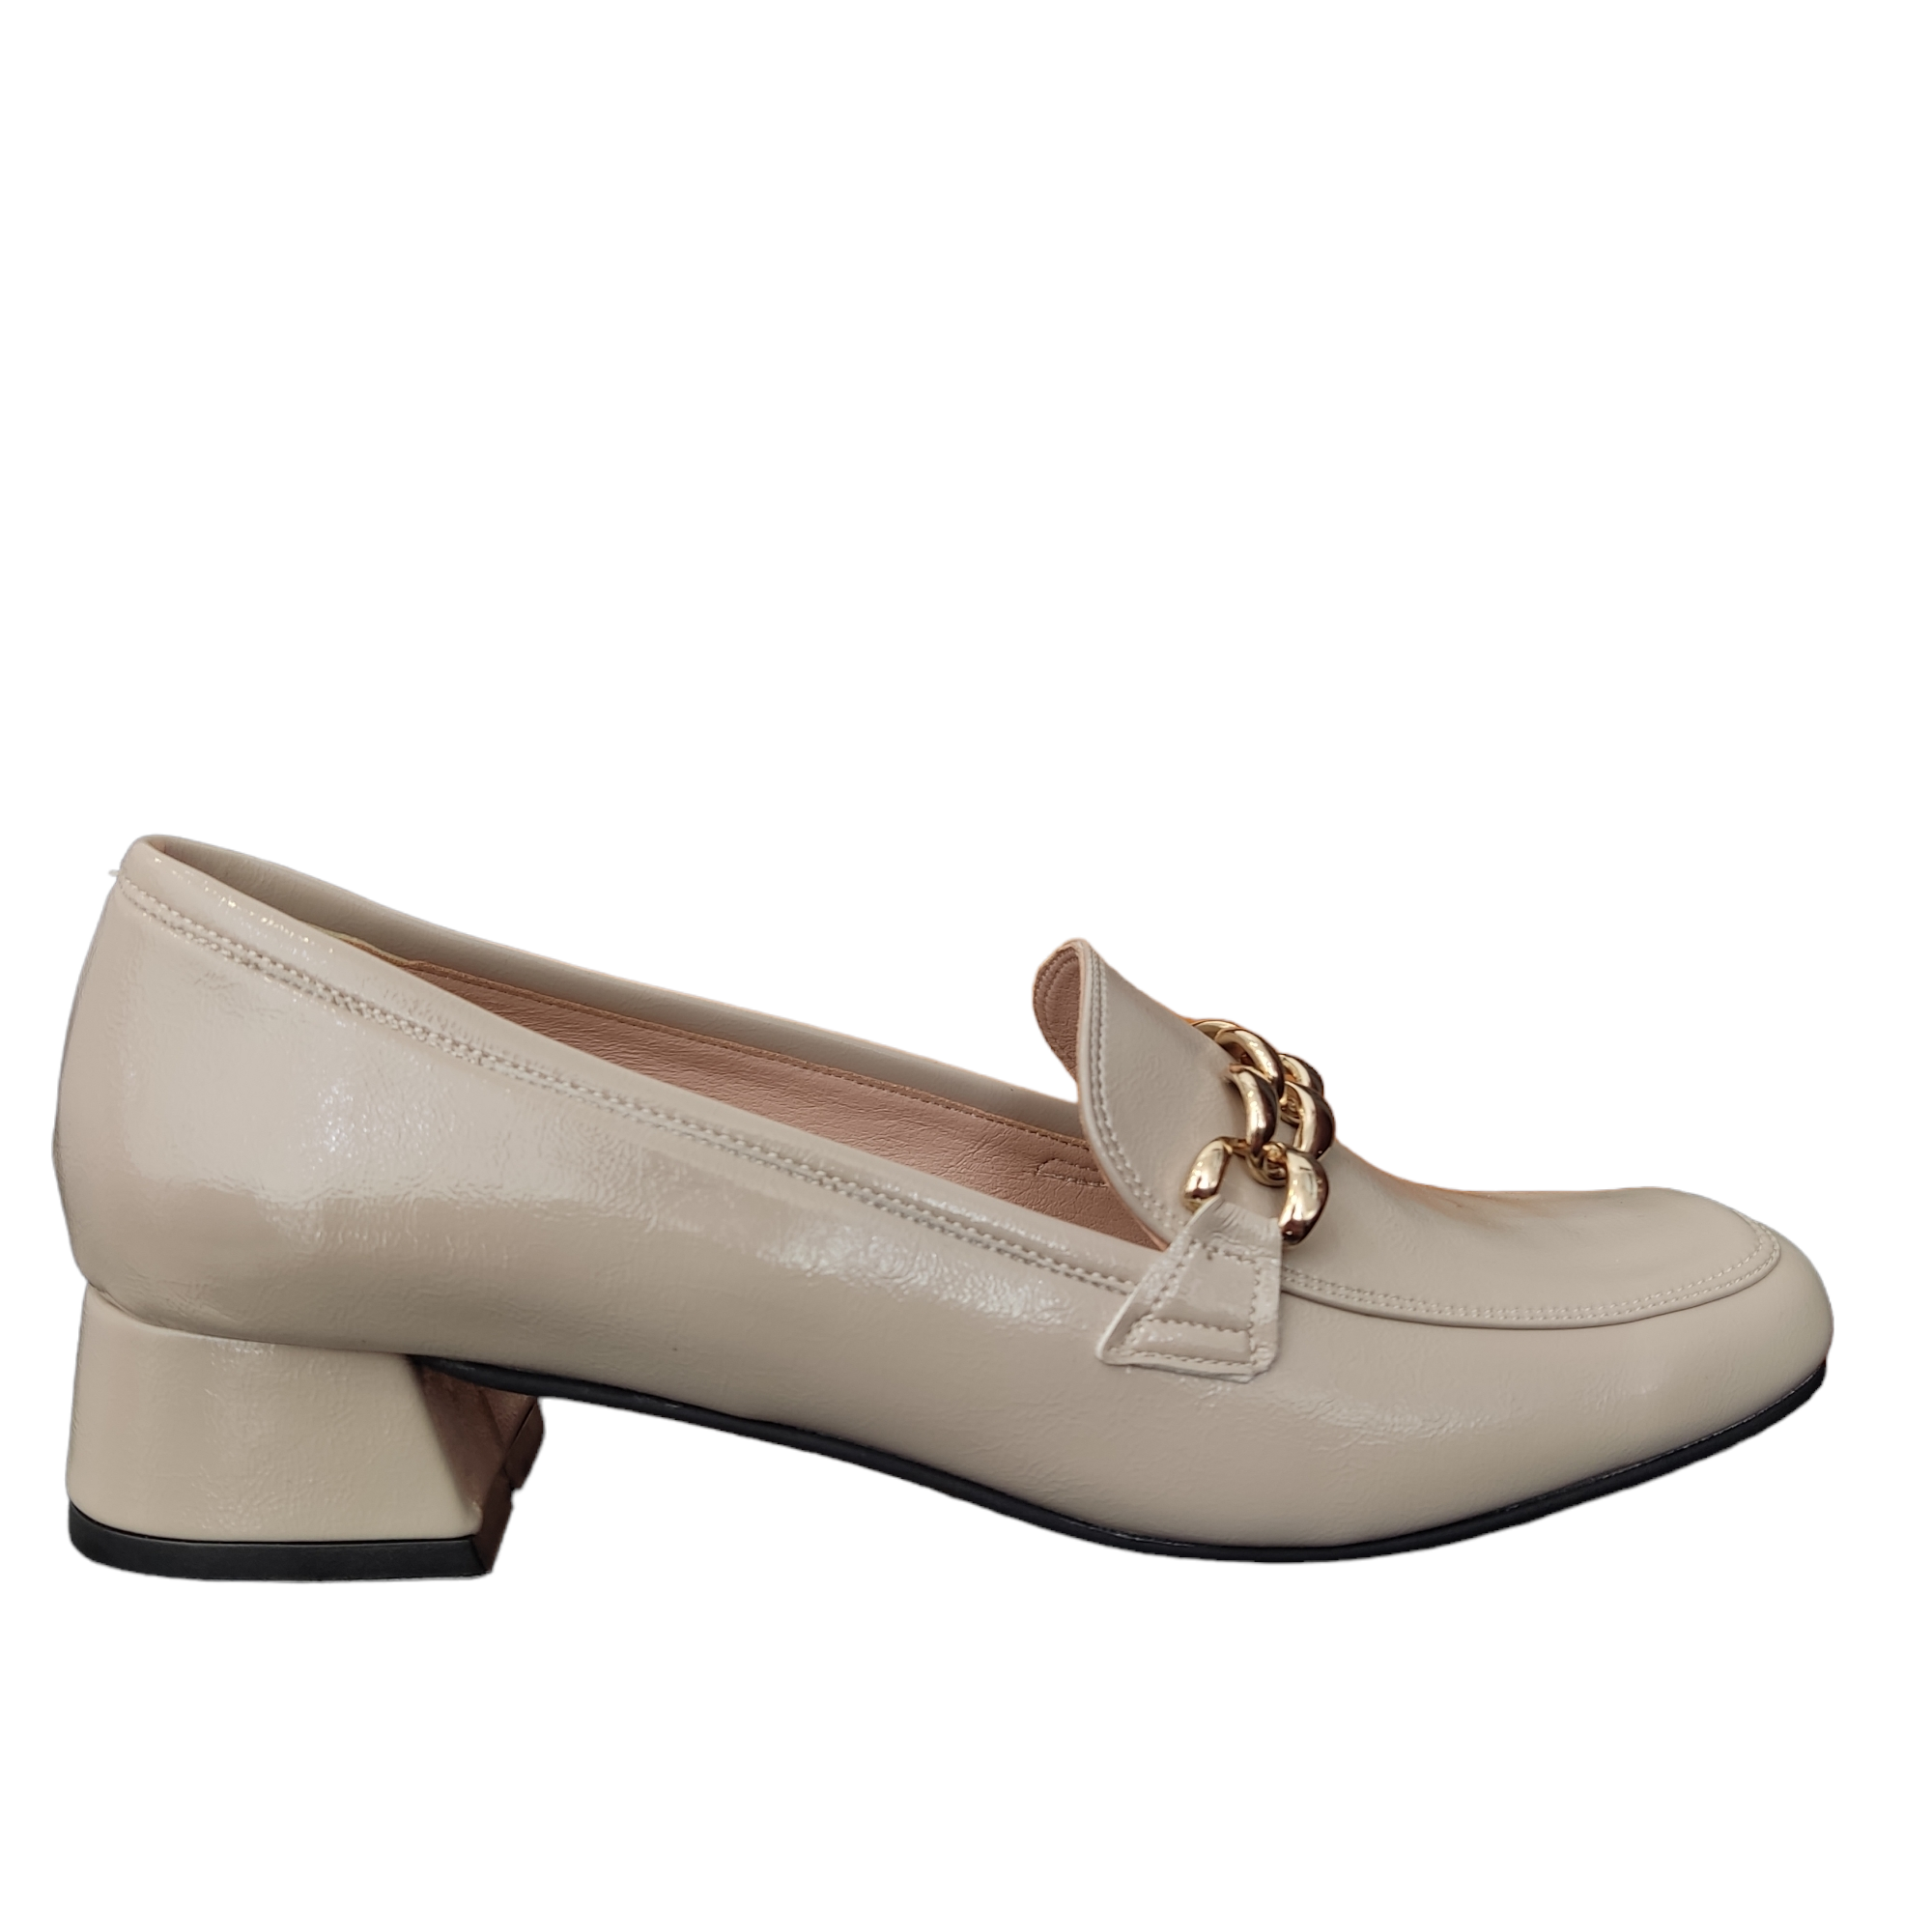 PATENT PUMPS WITH GOLD CHAIN 0452/2 STEFANIA BEIGE